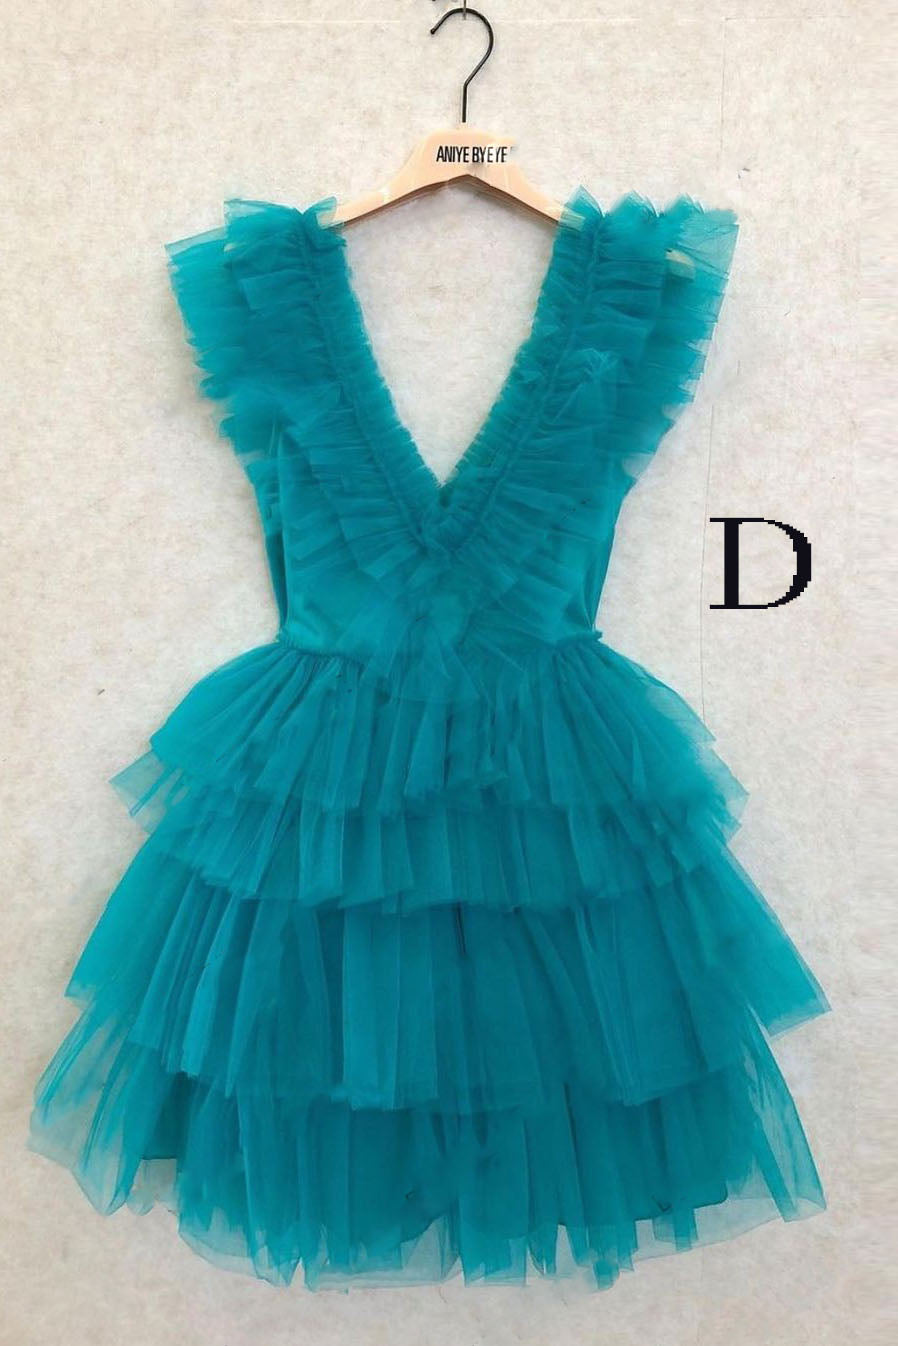 Bridesmaid Dresses, A Line Pink V Neck Tiered Homecoming Dress,Tulle Short Prom Party Dresses